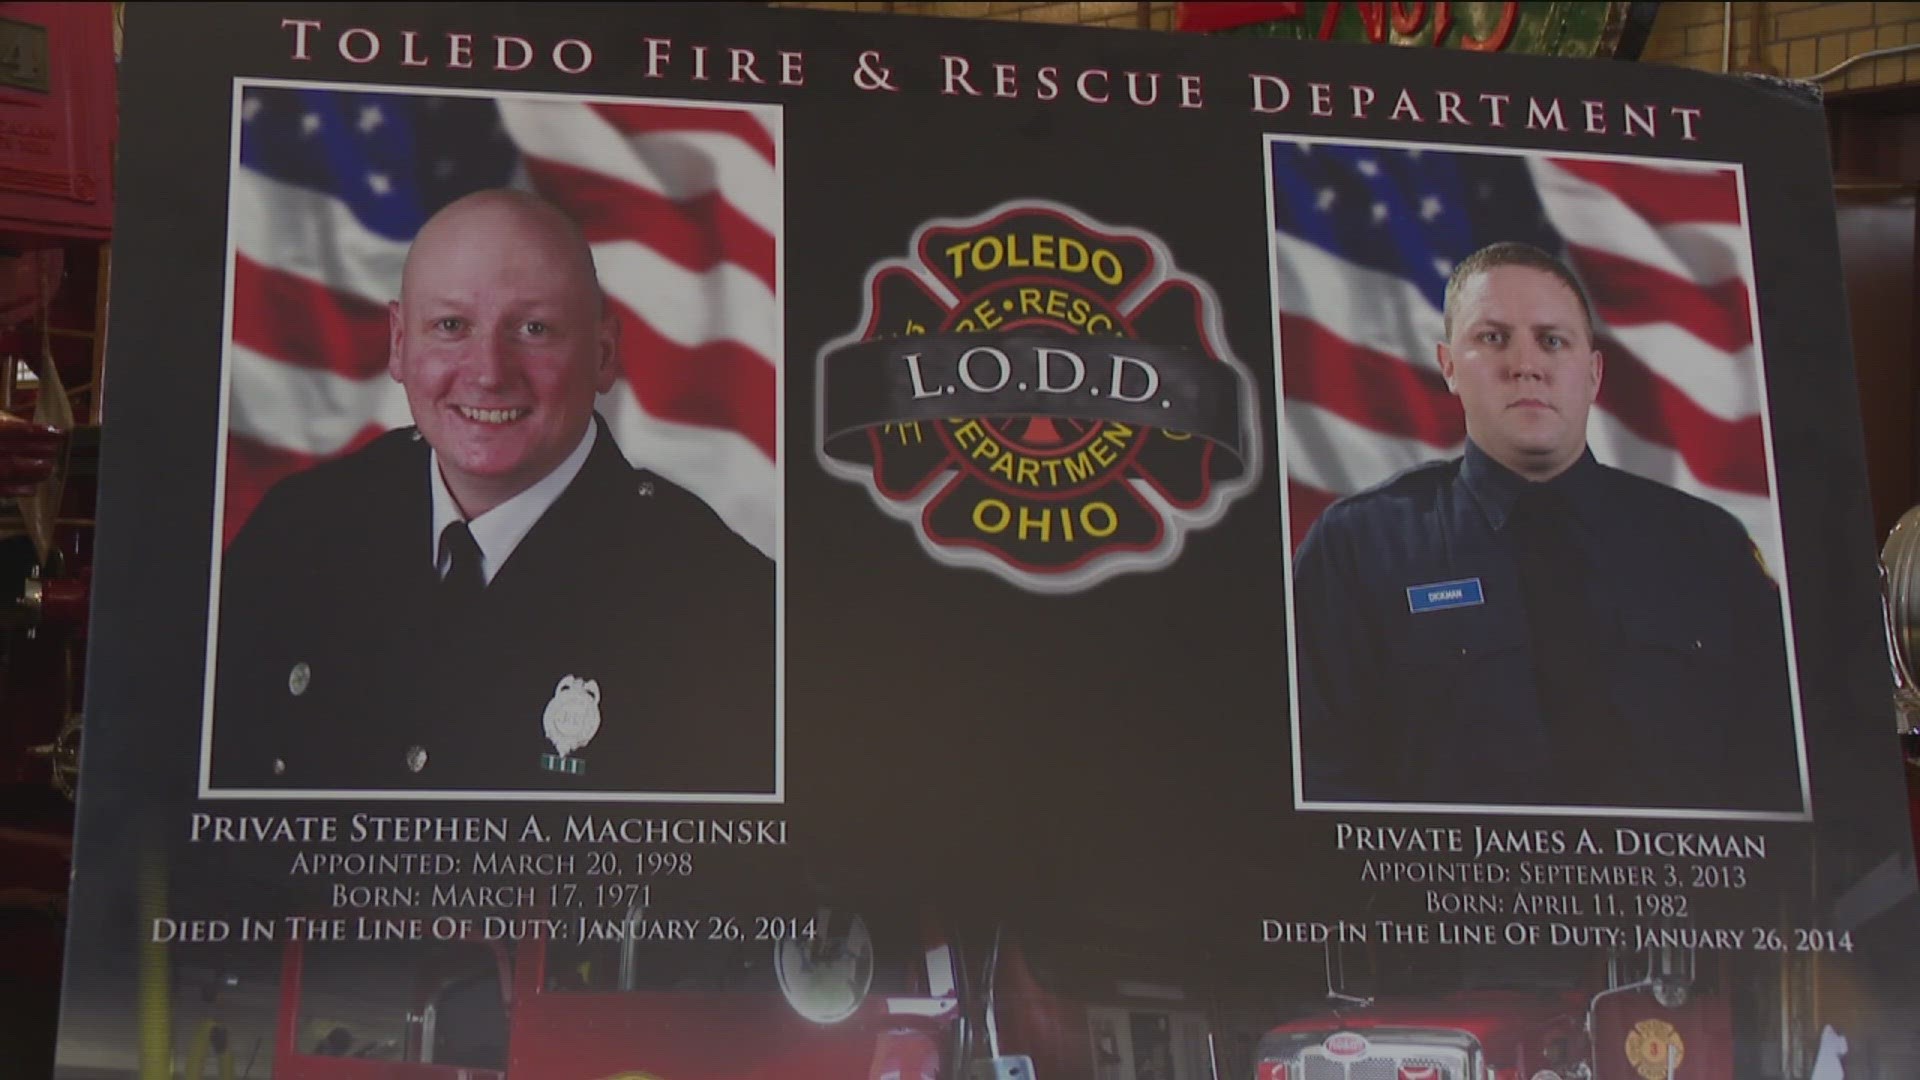 Toledo firefighters Jamie Dickman and Stephen Machcinski were killed while fighting a fire that was intentionally set at an apartment building on Magnolia Street.